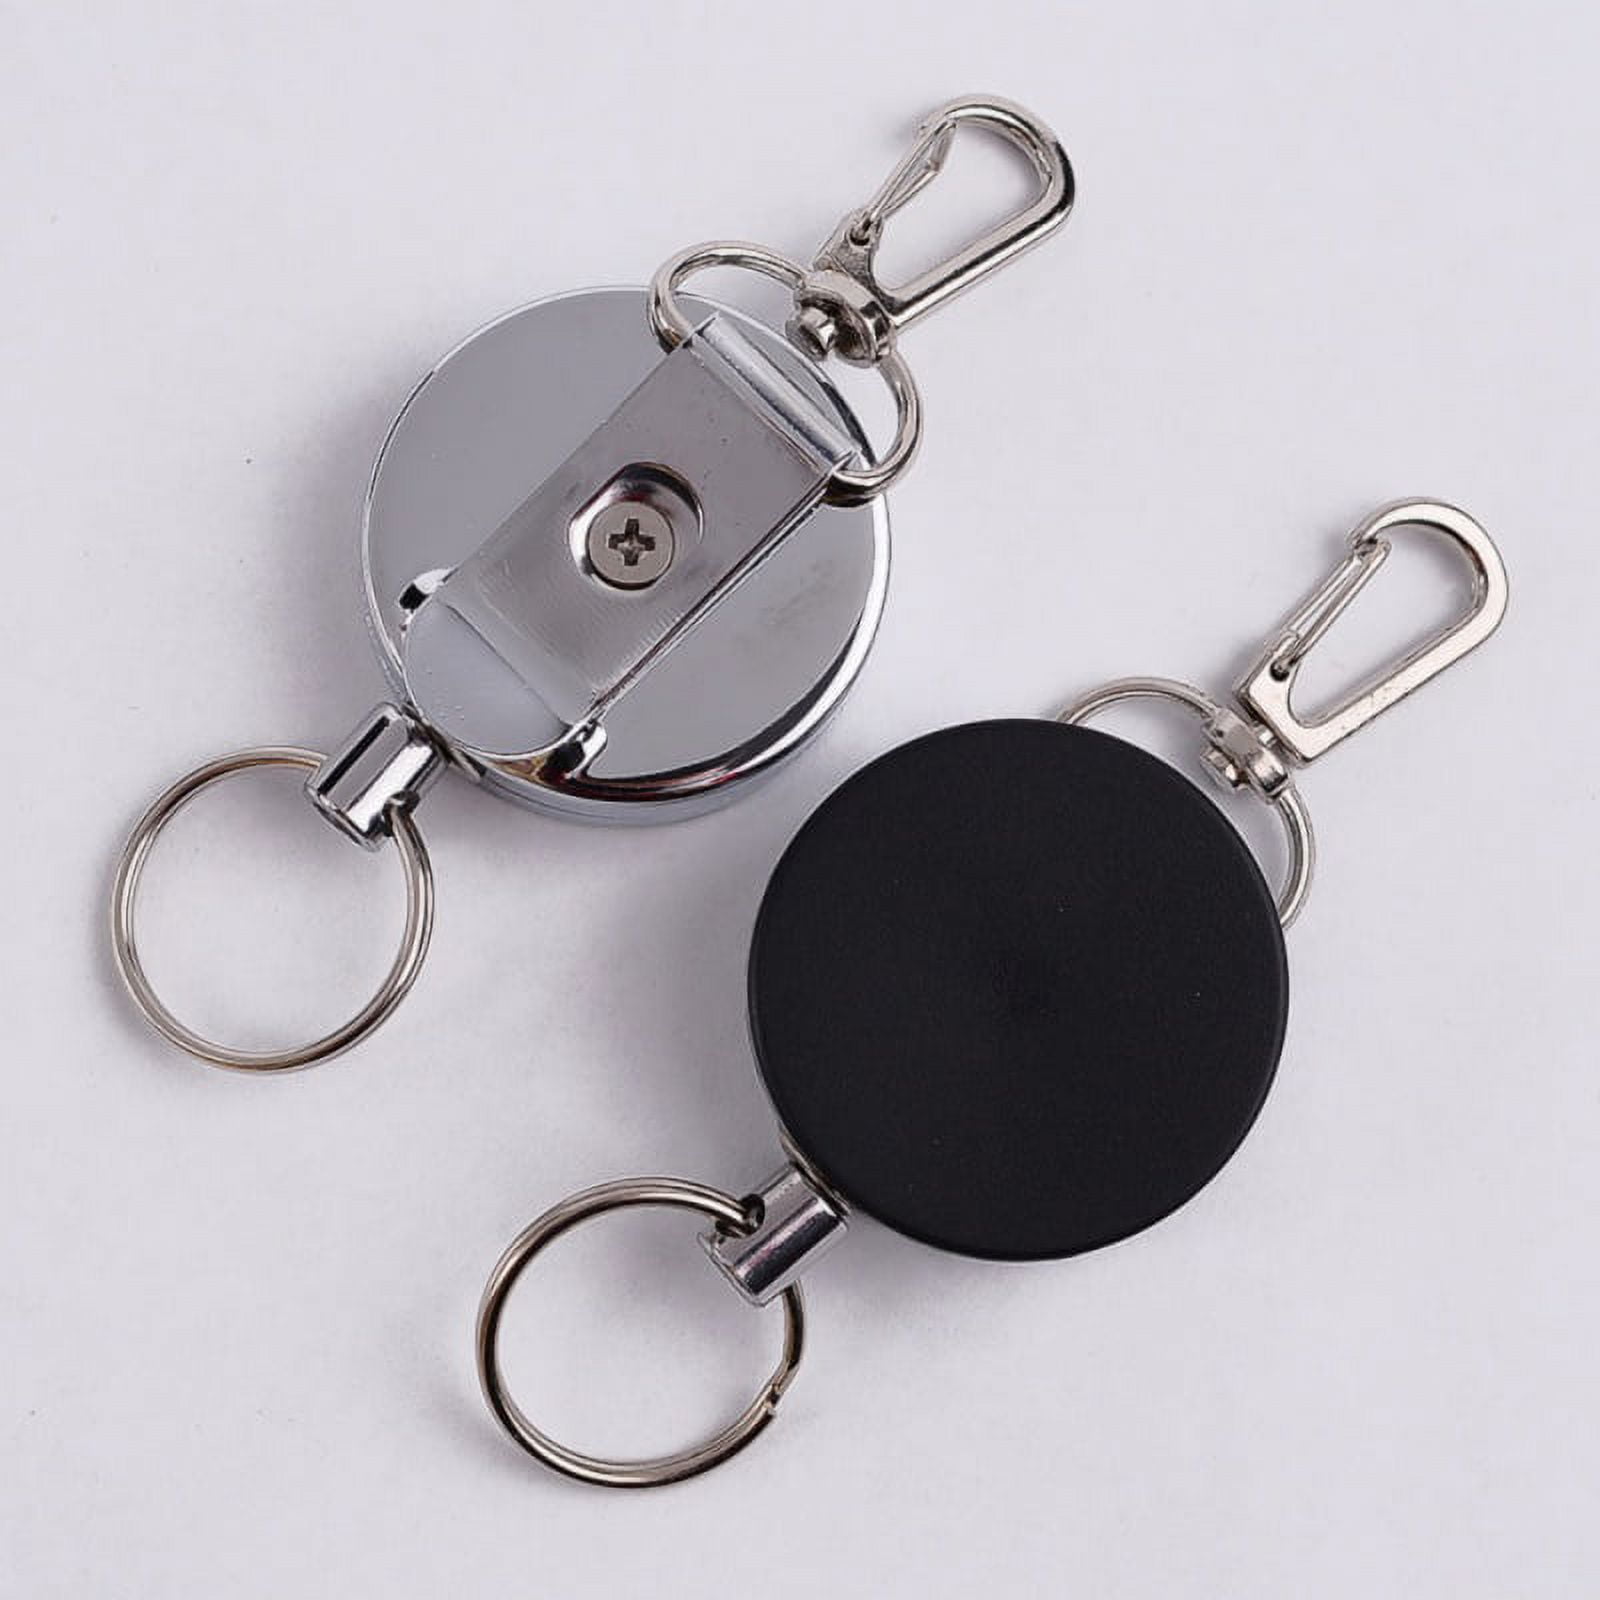 Multi Tool Reel Recoil Retractable Key Ring Pull Chain Belt Clip